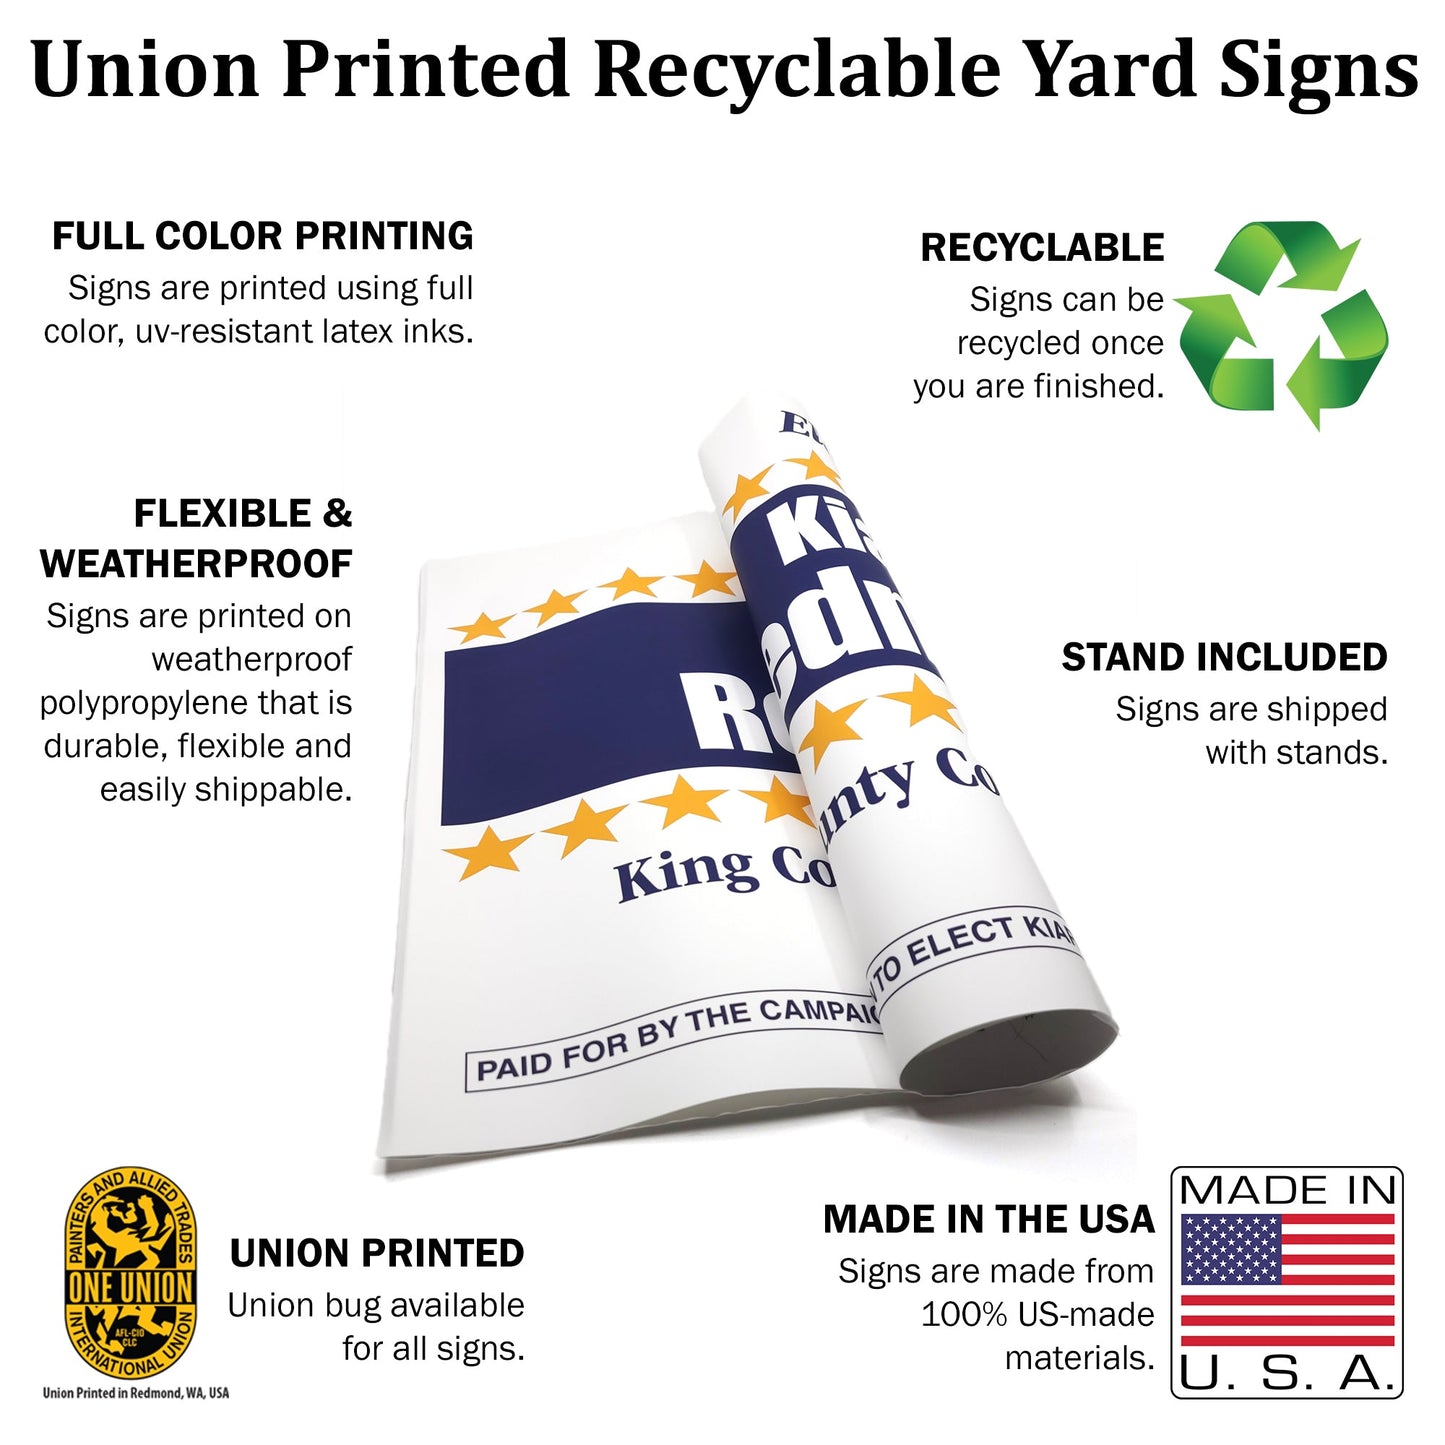 MerchBlue Union-Printed Yard Sign - 24x18 - Three Stars design - Recyclable - Made in the USA